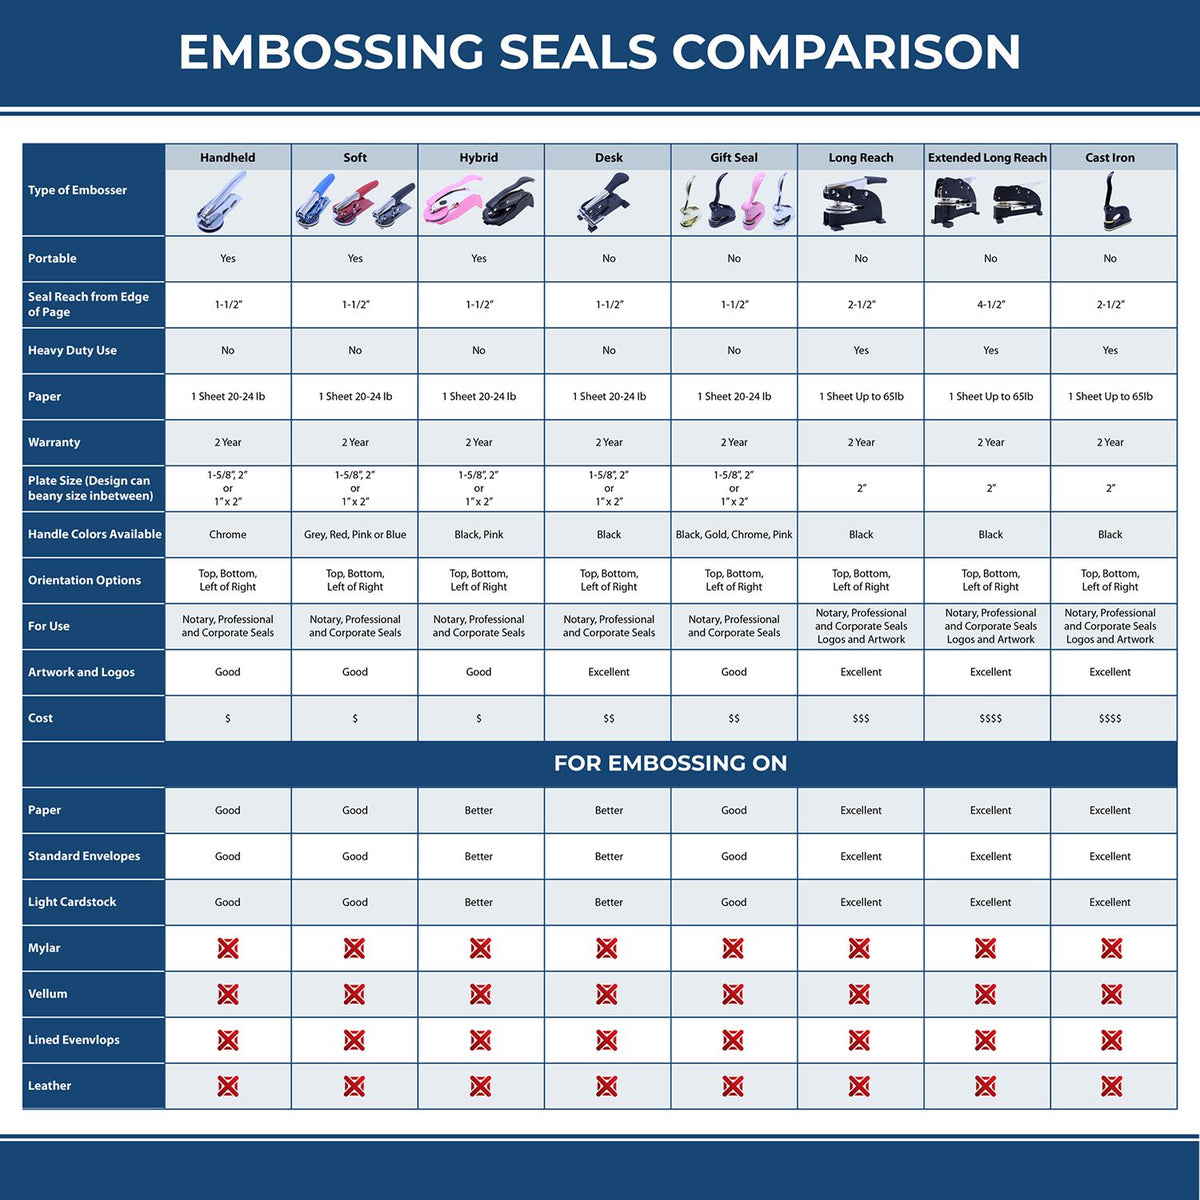 A comparison chart for the different types of mount models available for the Gift Massachusetts Engineer Seal